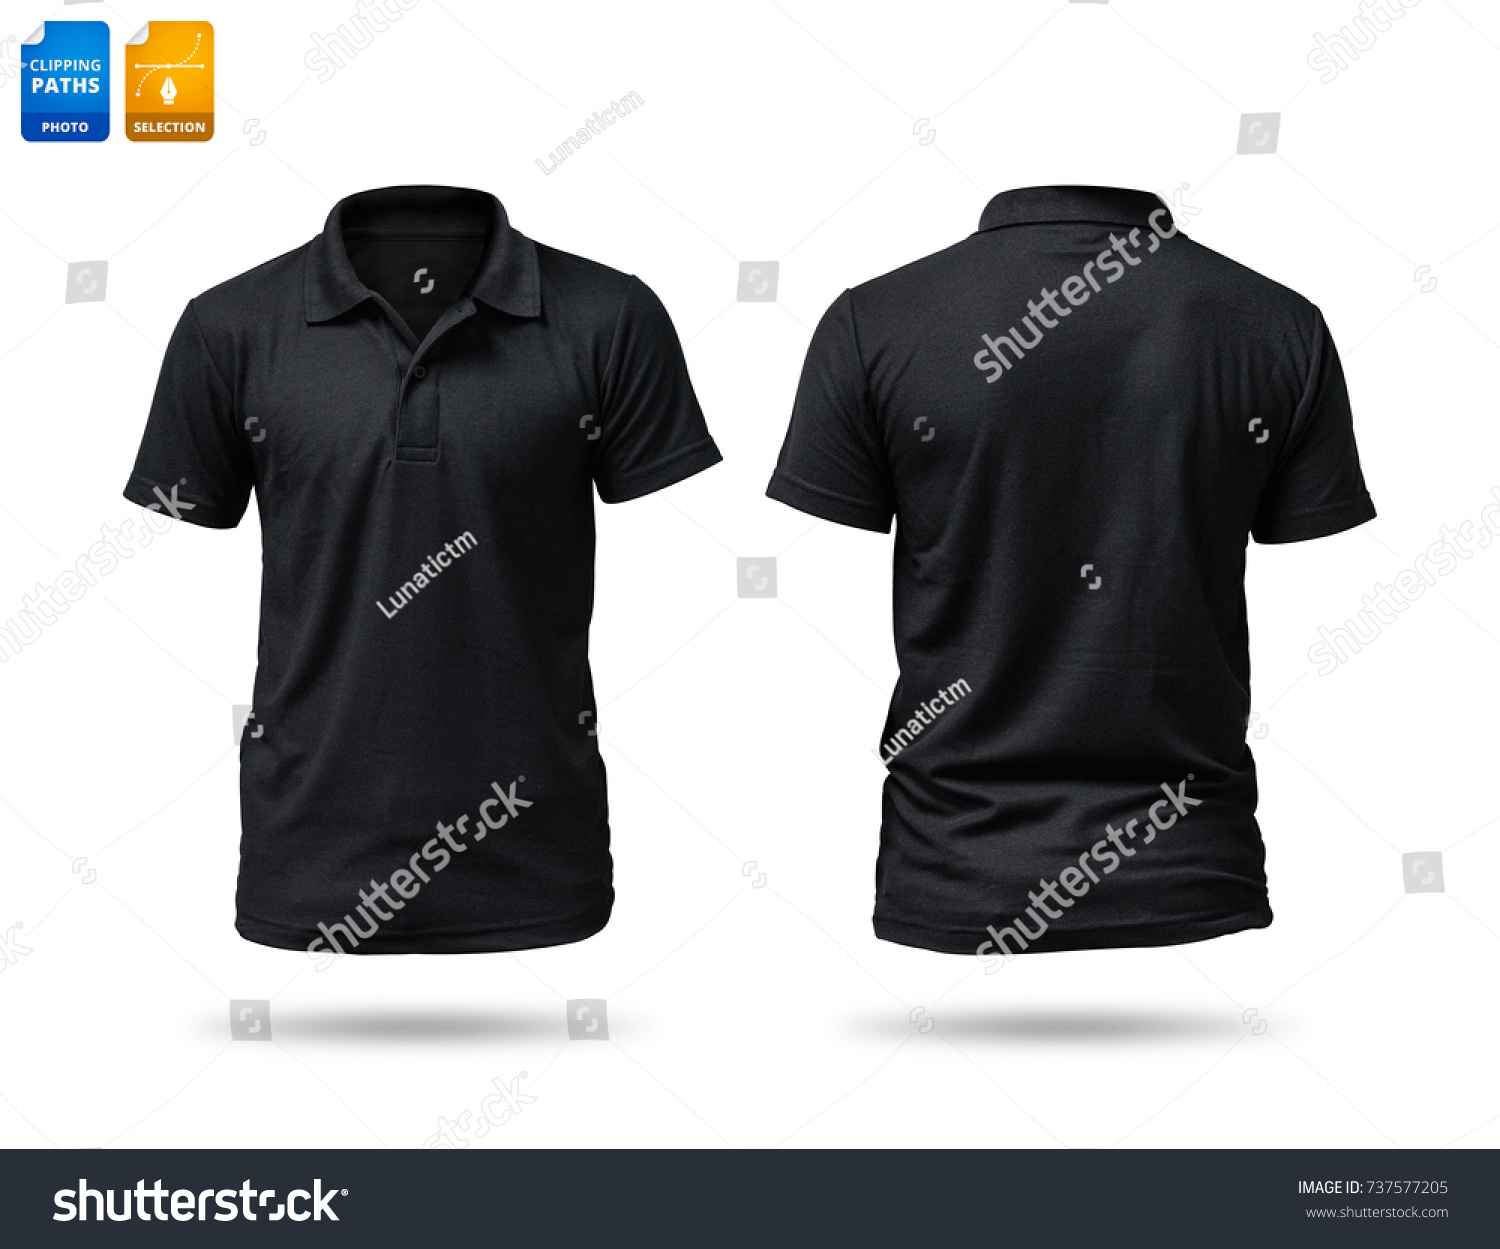 Black shirt isolated on white background. Template of cotton shirt for your design. Clipping paths object. #737577205